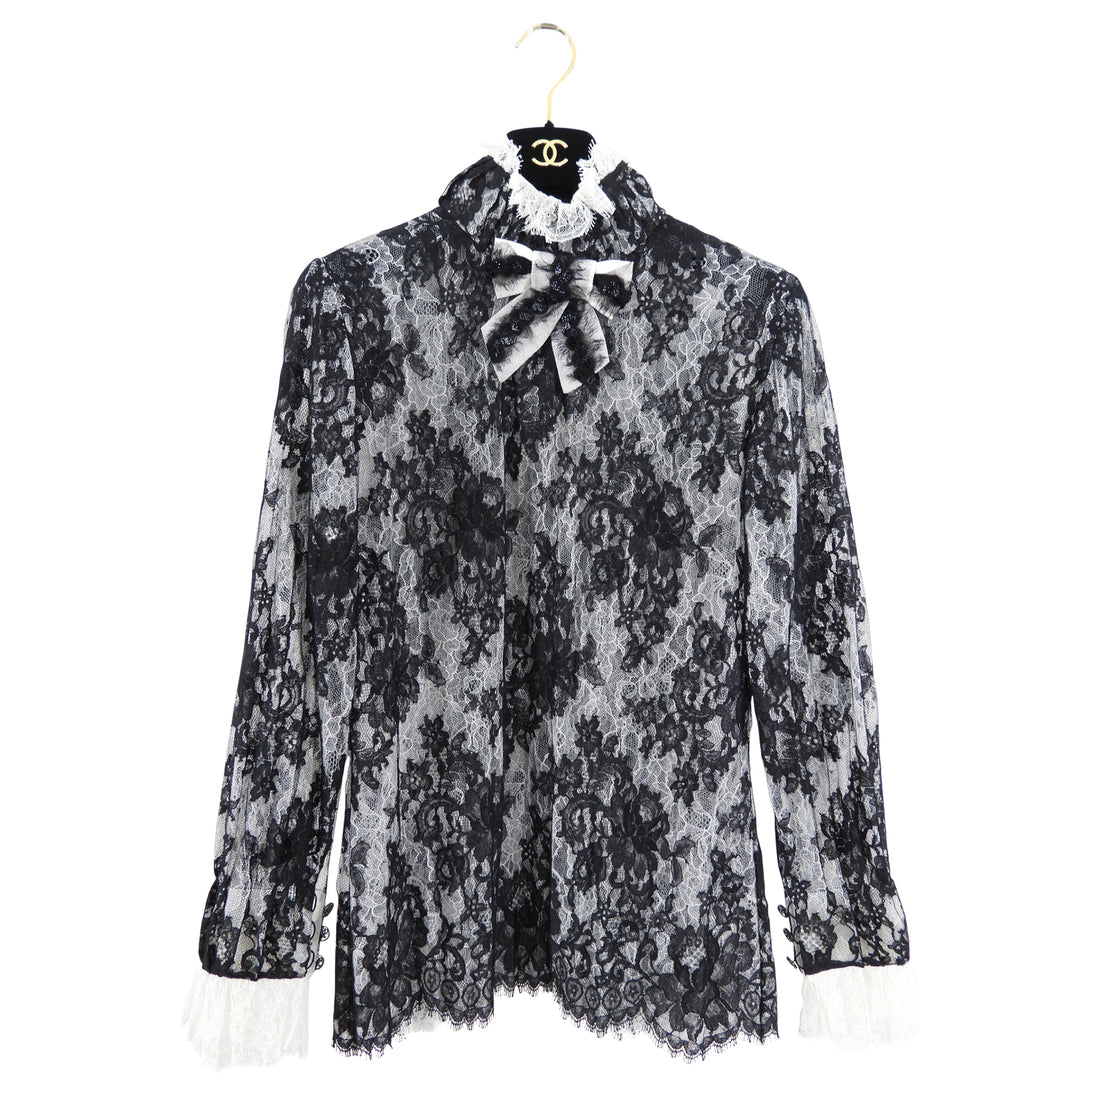 Chanel Pre-Fall 2015 Runway Black and White Lace Blouse - FR38 / S